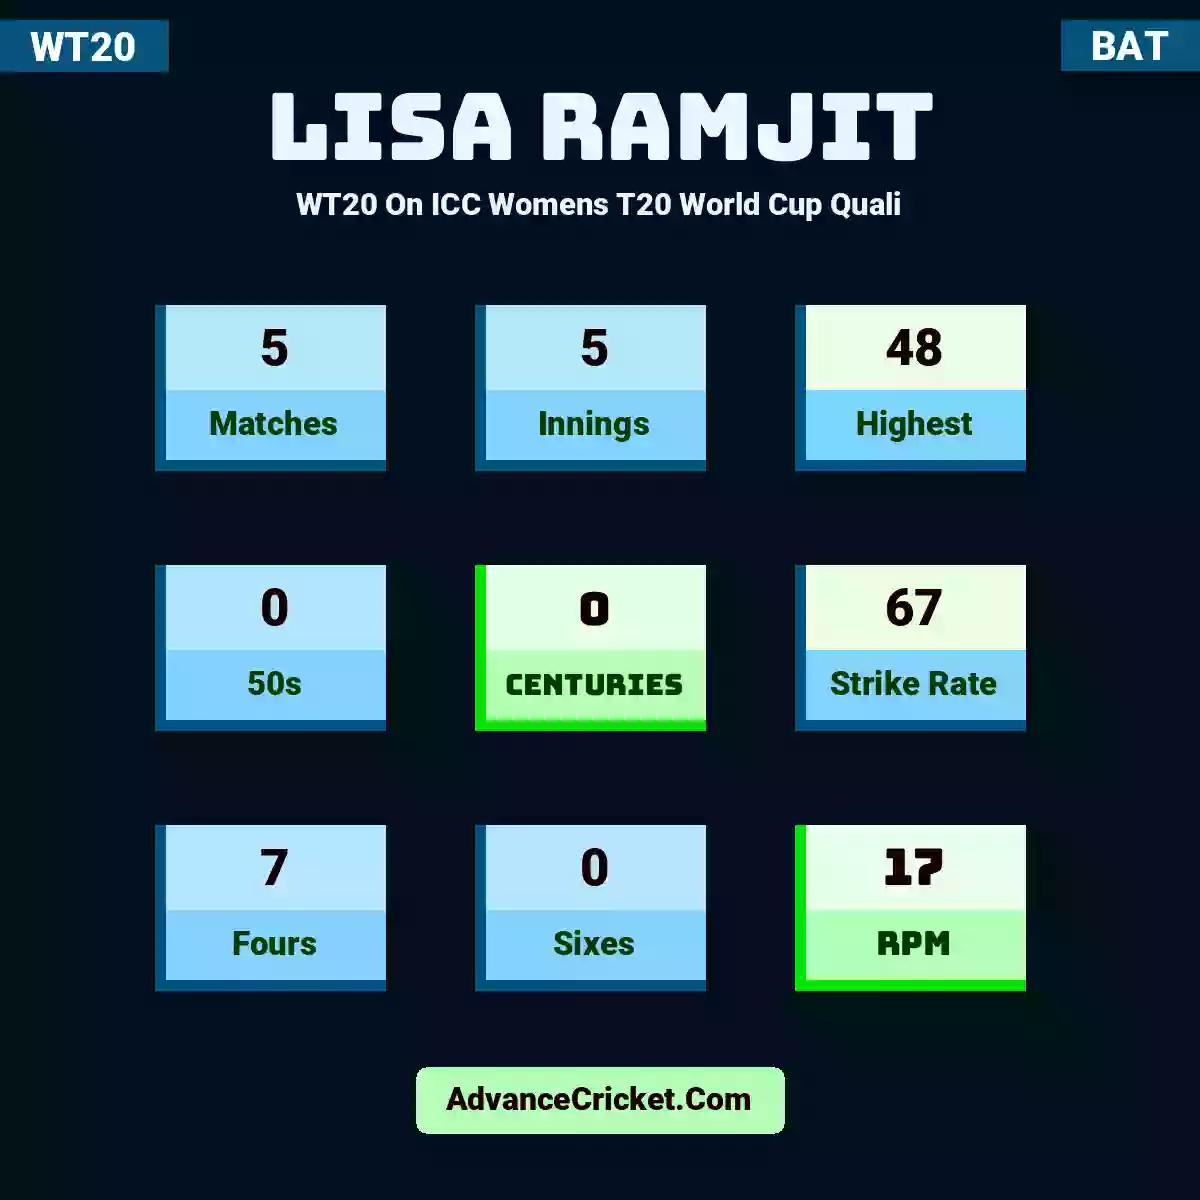 Lisa Ramjit WT20  On ICC Womens T20 World Cup Quali, Lisa Ramjit played 5 matches, scored 48 runs as highest, 0 half-centuries, and 0 centuries, with a strike rate of 67. L.Ramjit hit 7 fours and 0 sixes, with an RPM of 17.